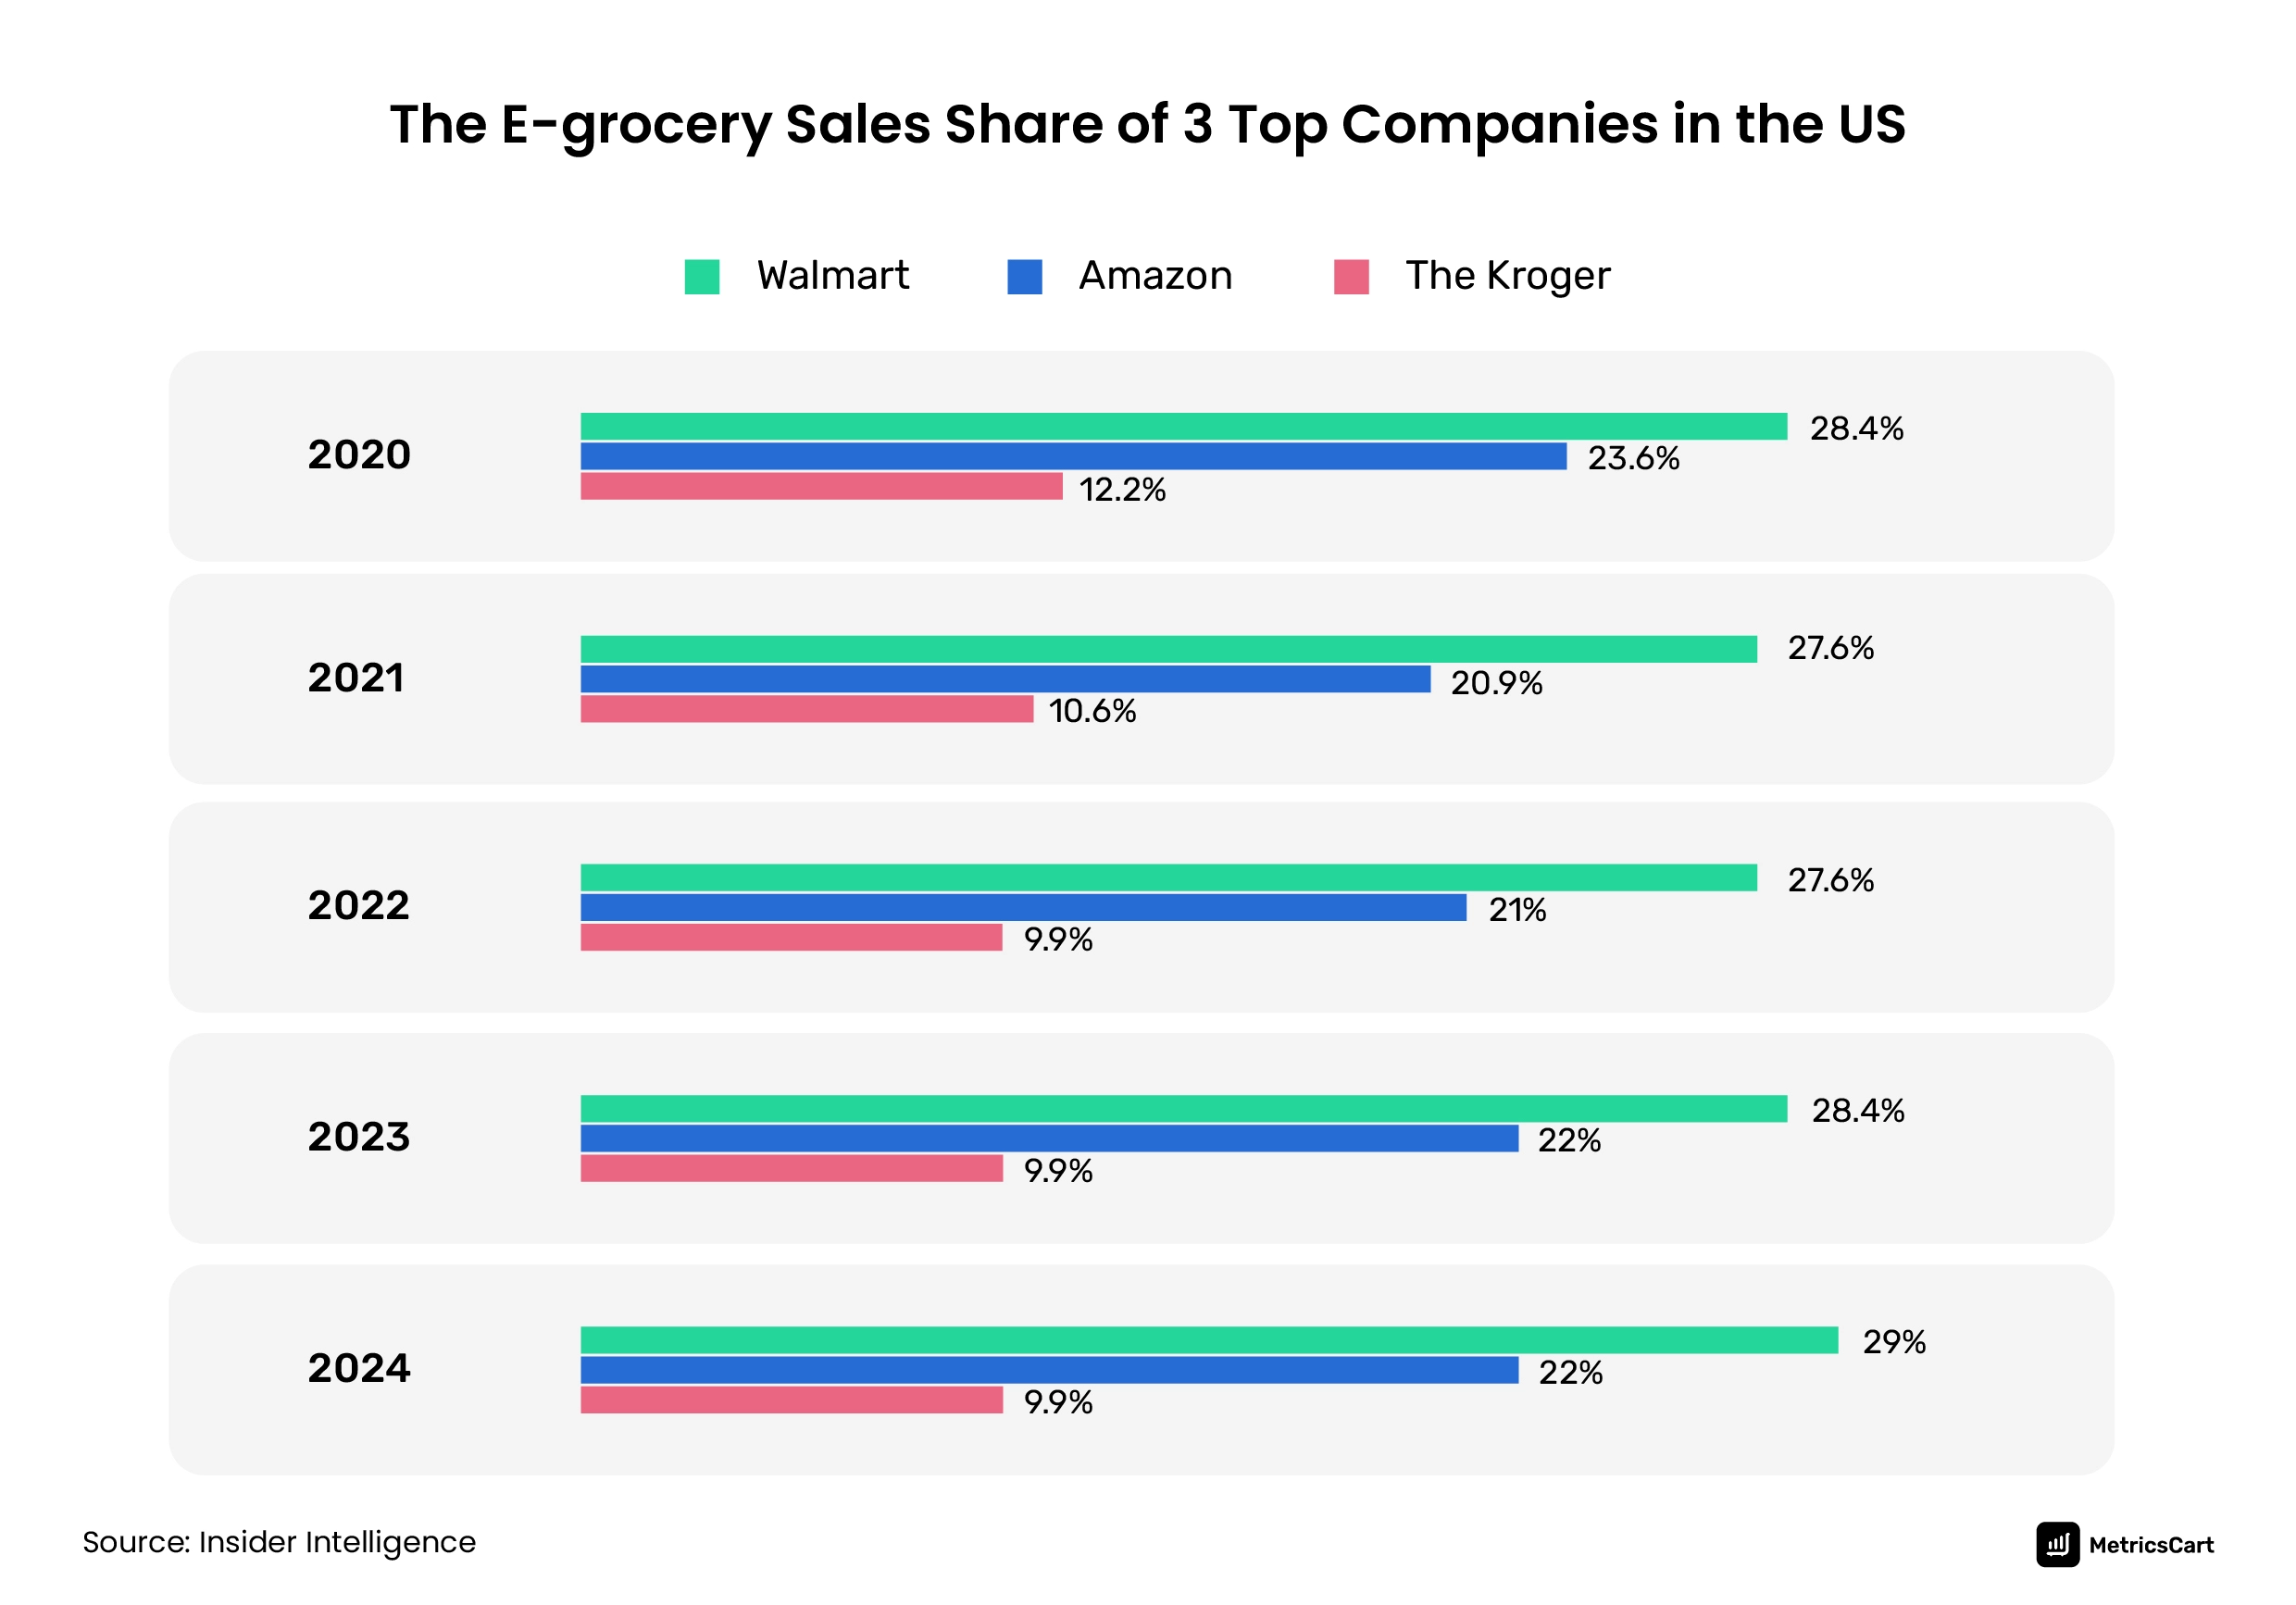 Top 3 grocers in US